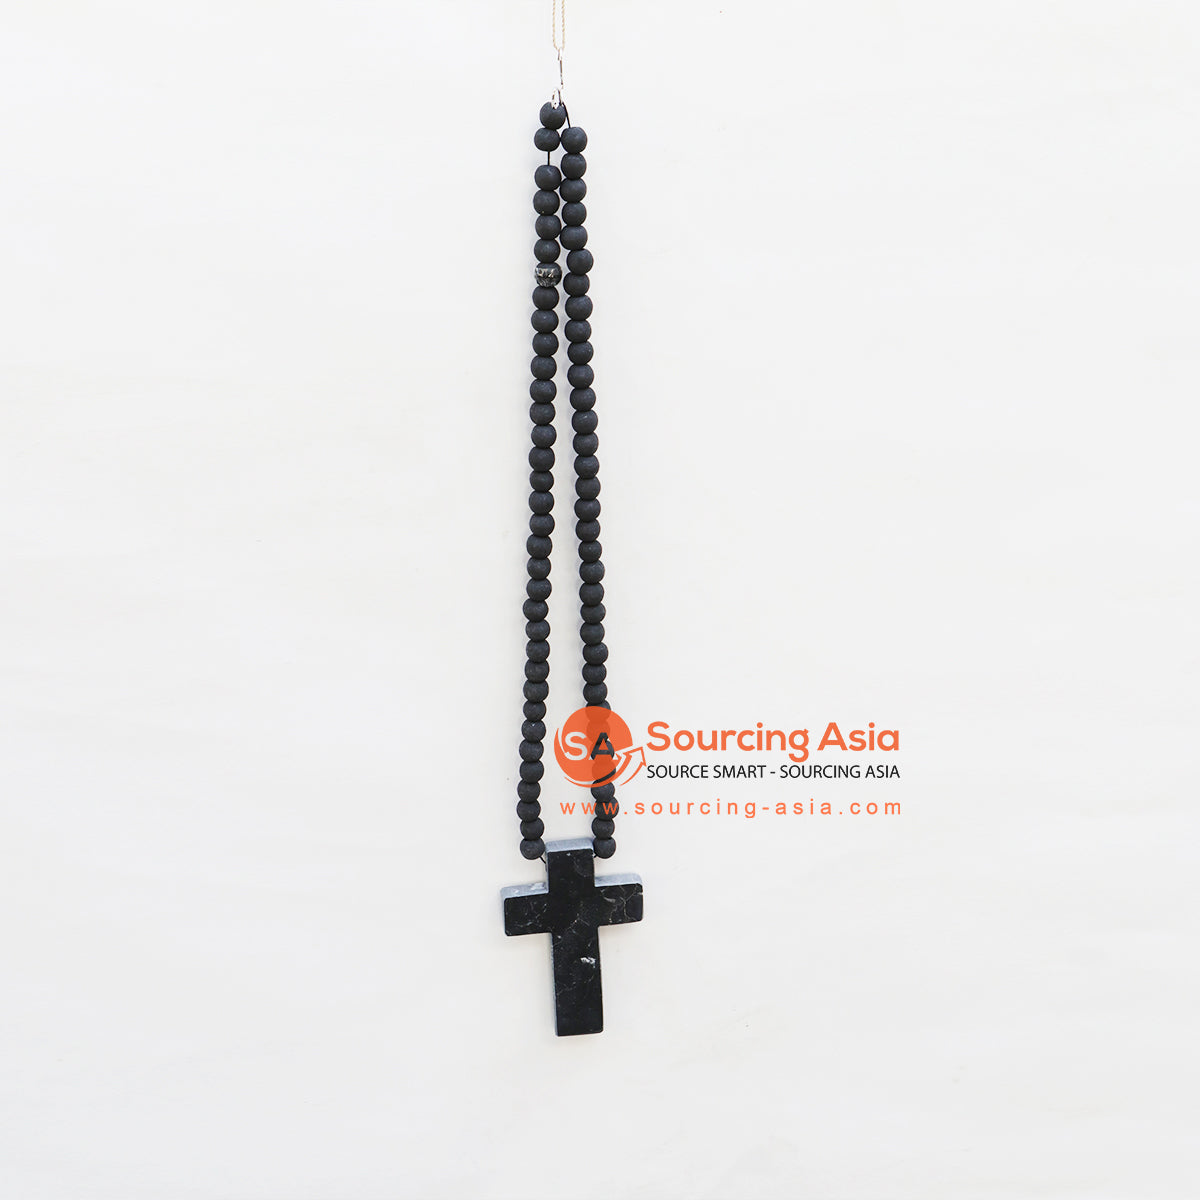 EXAC017 BLACK TIMBER BEADS NECKLACE WITH CROSS PENDANT WALL DECORATION